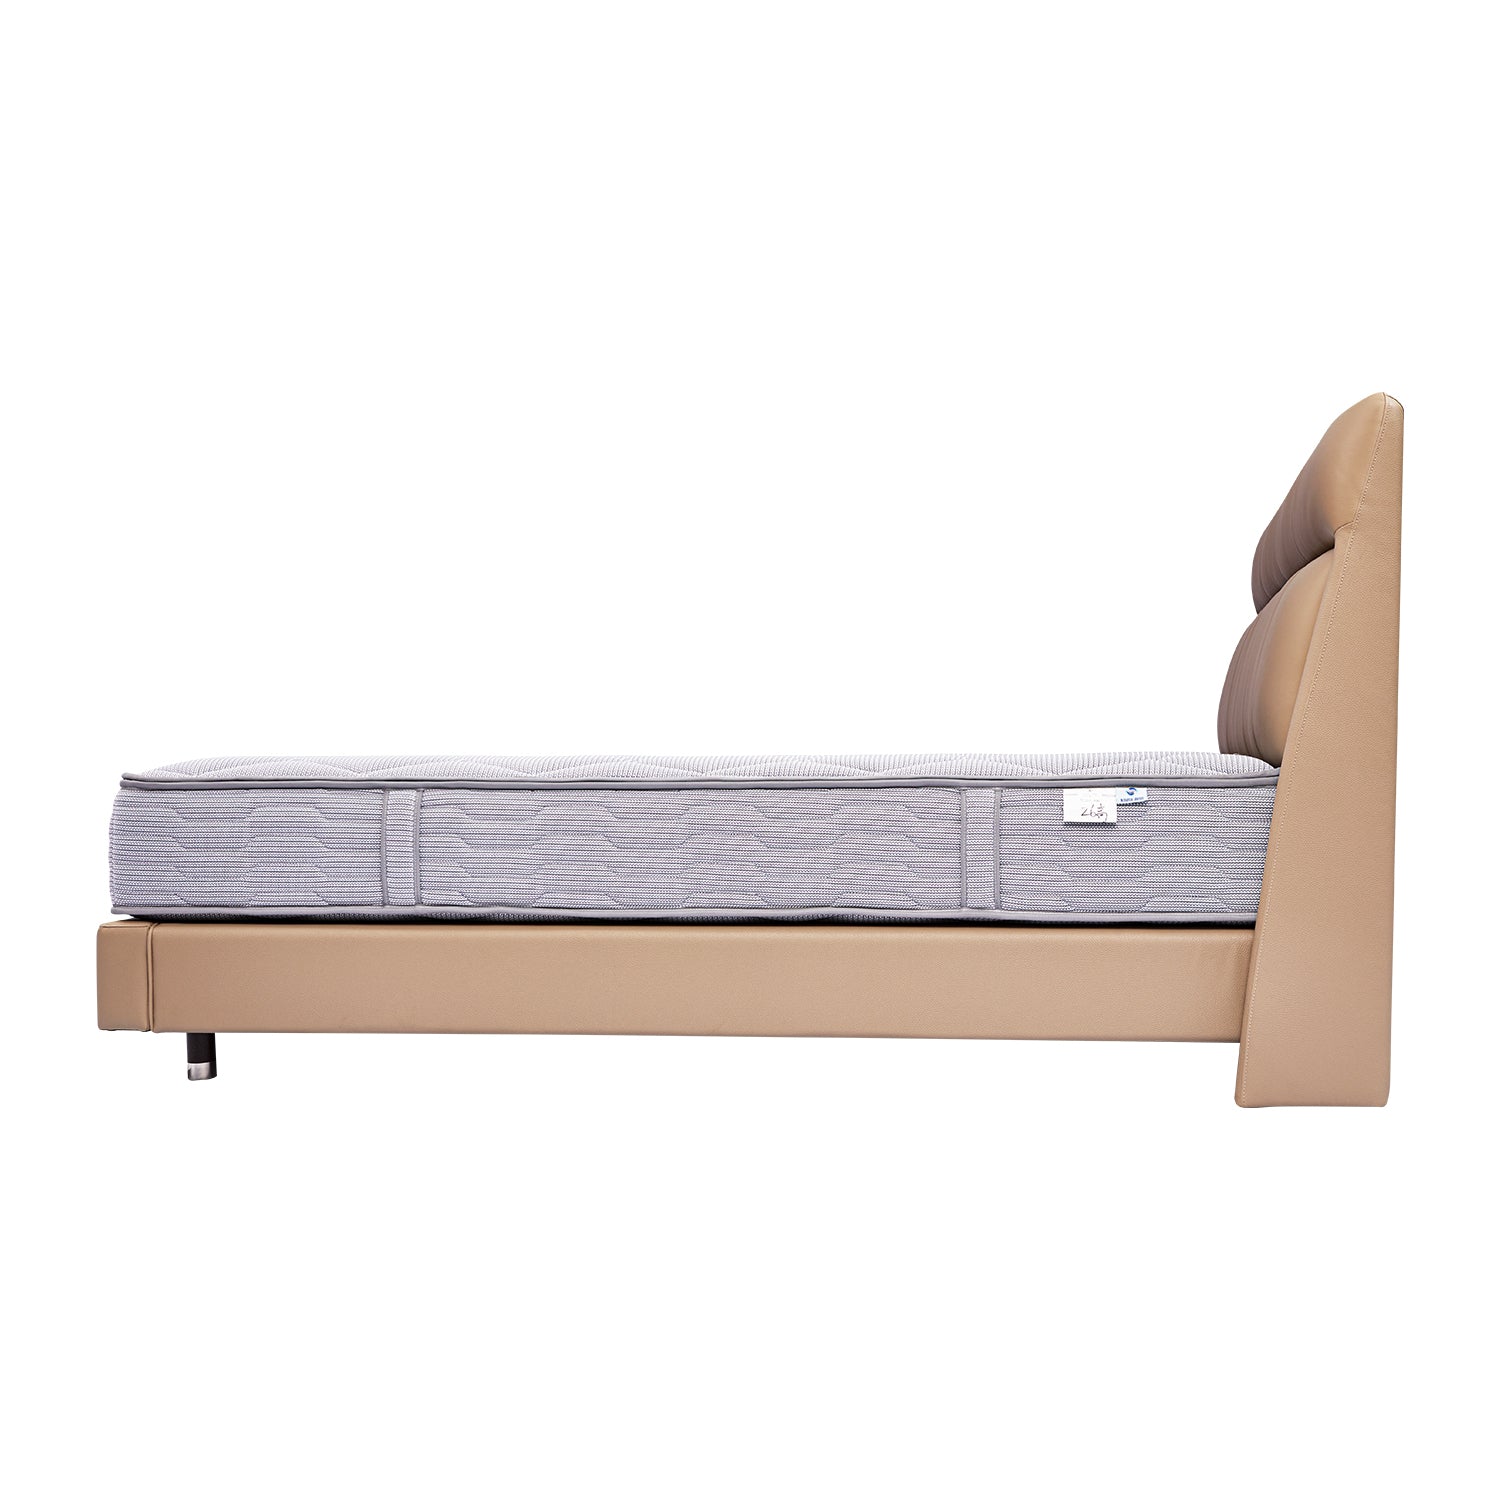 Side view of DeRUCCI Bed Frame BOC1 - 011 with beige upholstered frame and grey mattress